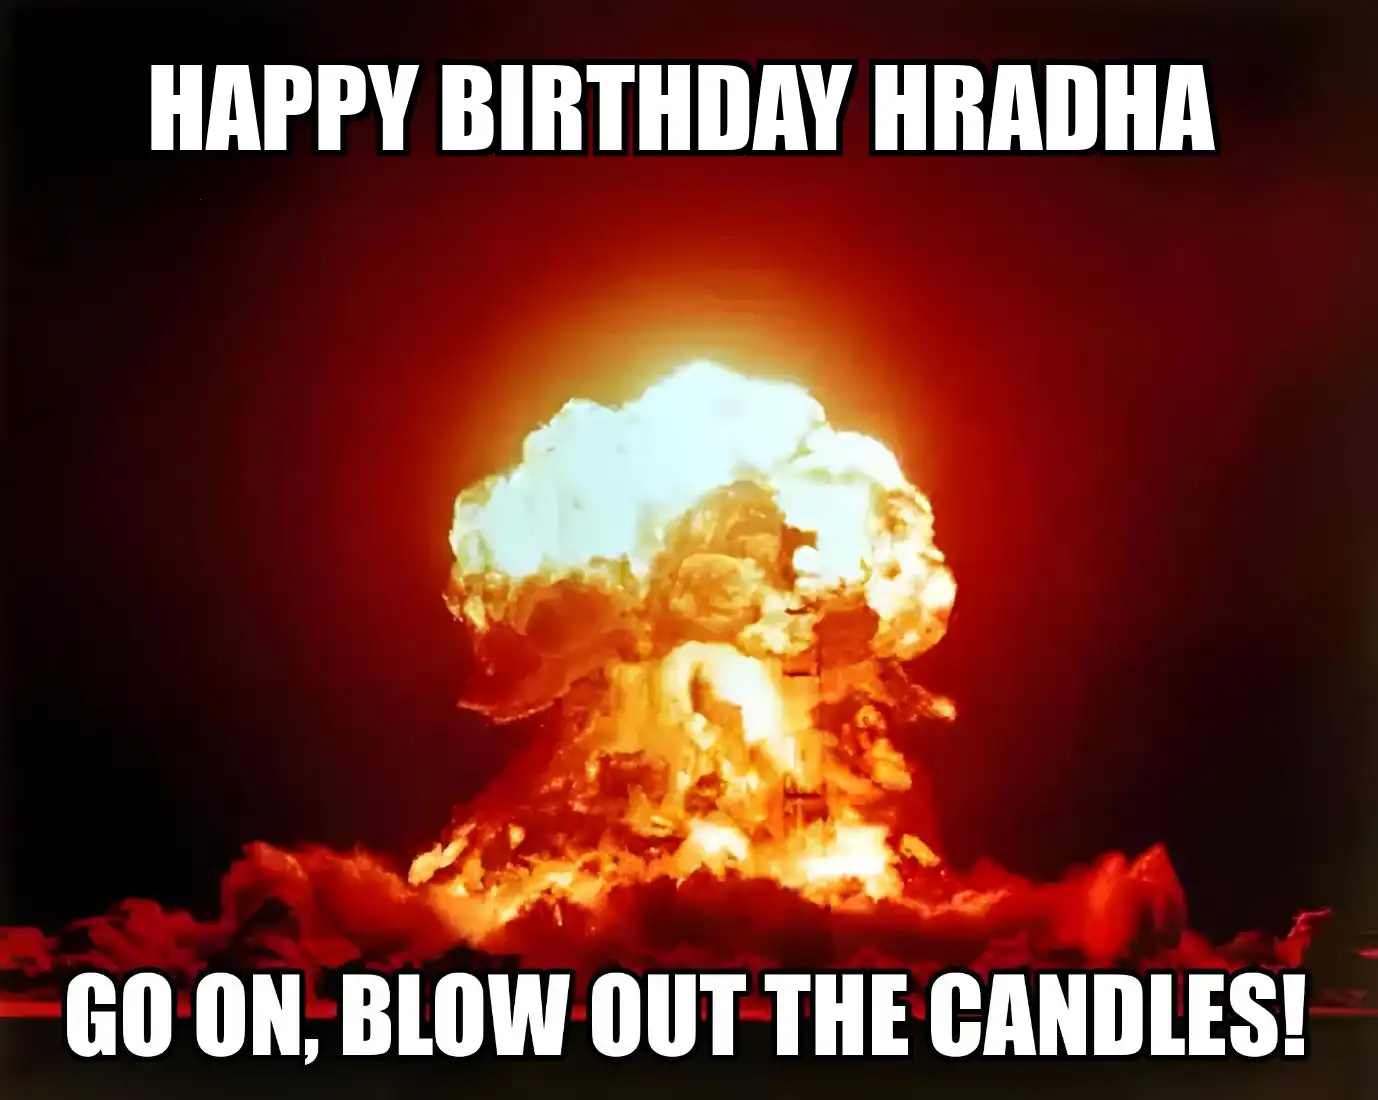 Happy Birthday Hradha Go On Blow Out The Candles Meme